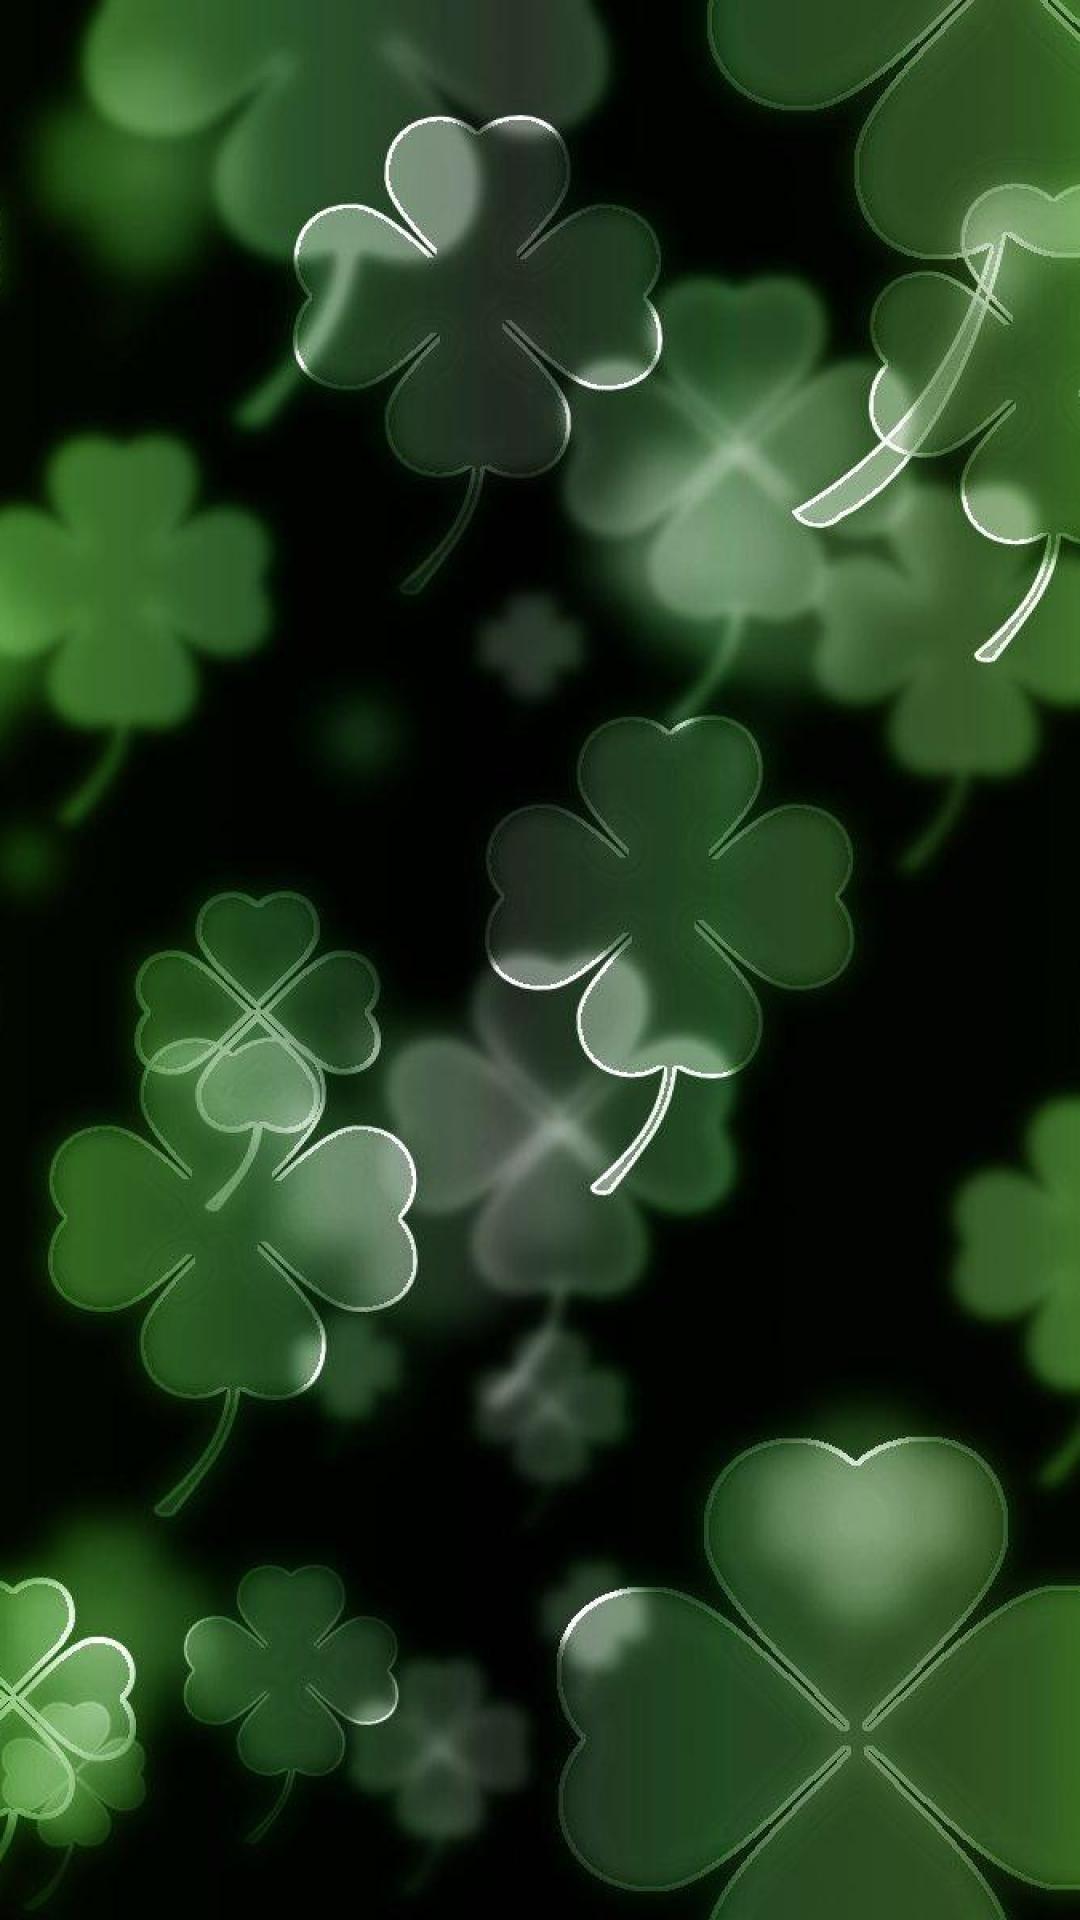 Four Leaf Clover Wallpapers Top Free Four Leaf Clover Backgrounds Wallpaperaccess